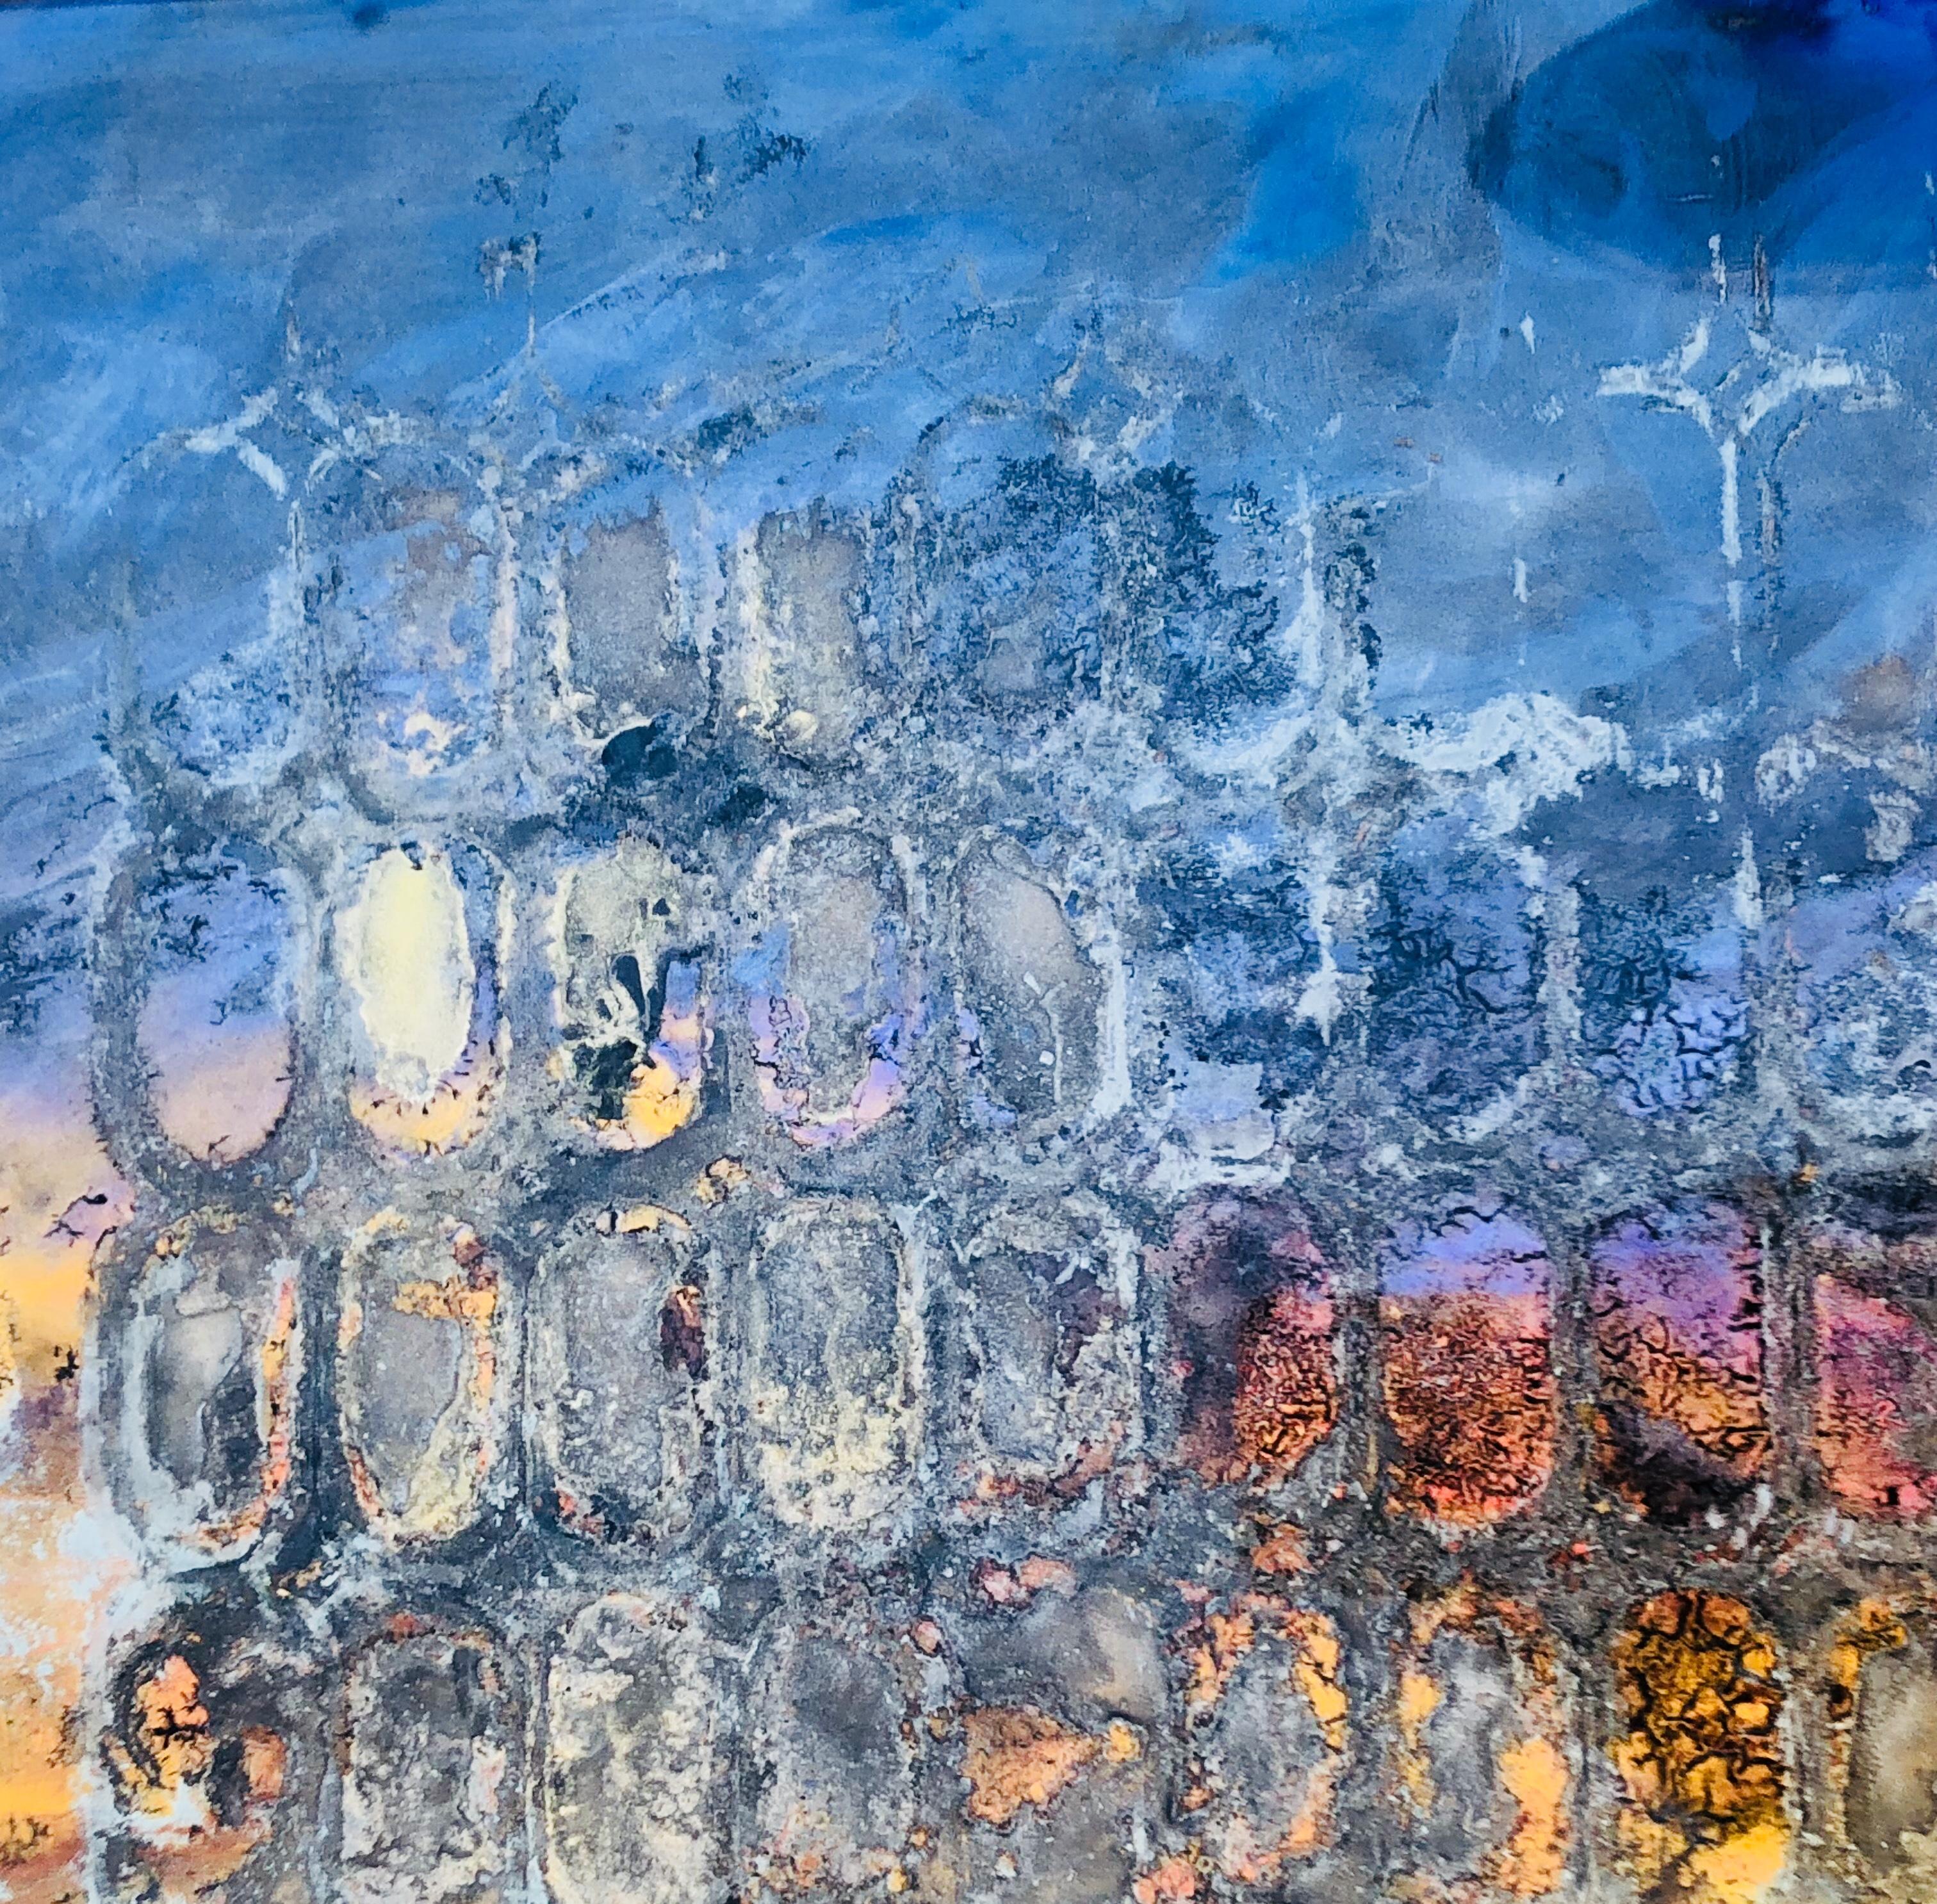 Exclusively represented by OpenMind Art Gallery original painting over glass On the edge of the visible (1) by Vova Zayichenko continues series of unique works of art created on the glass. 
Due to complex, multiple layering technique, the artist is